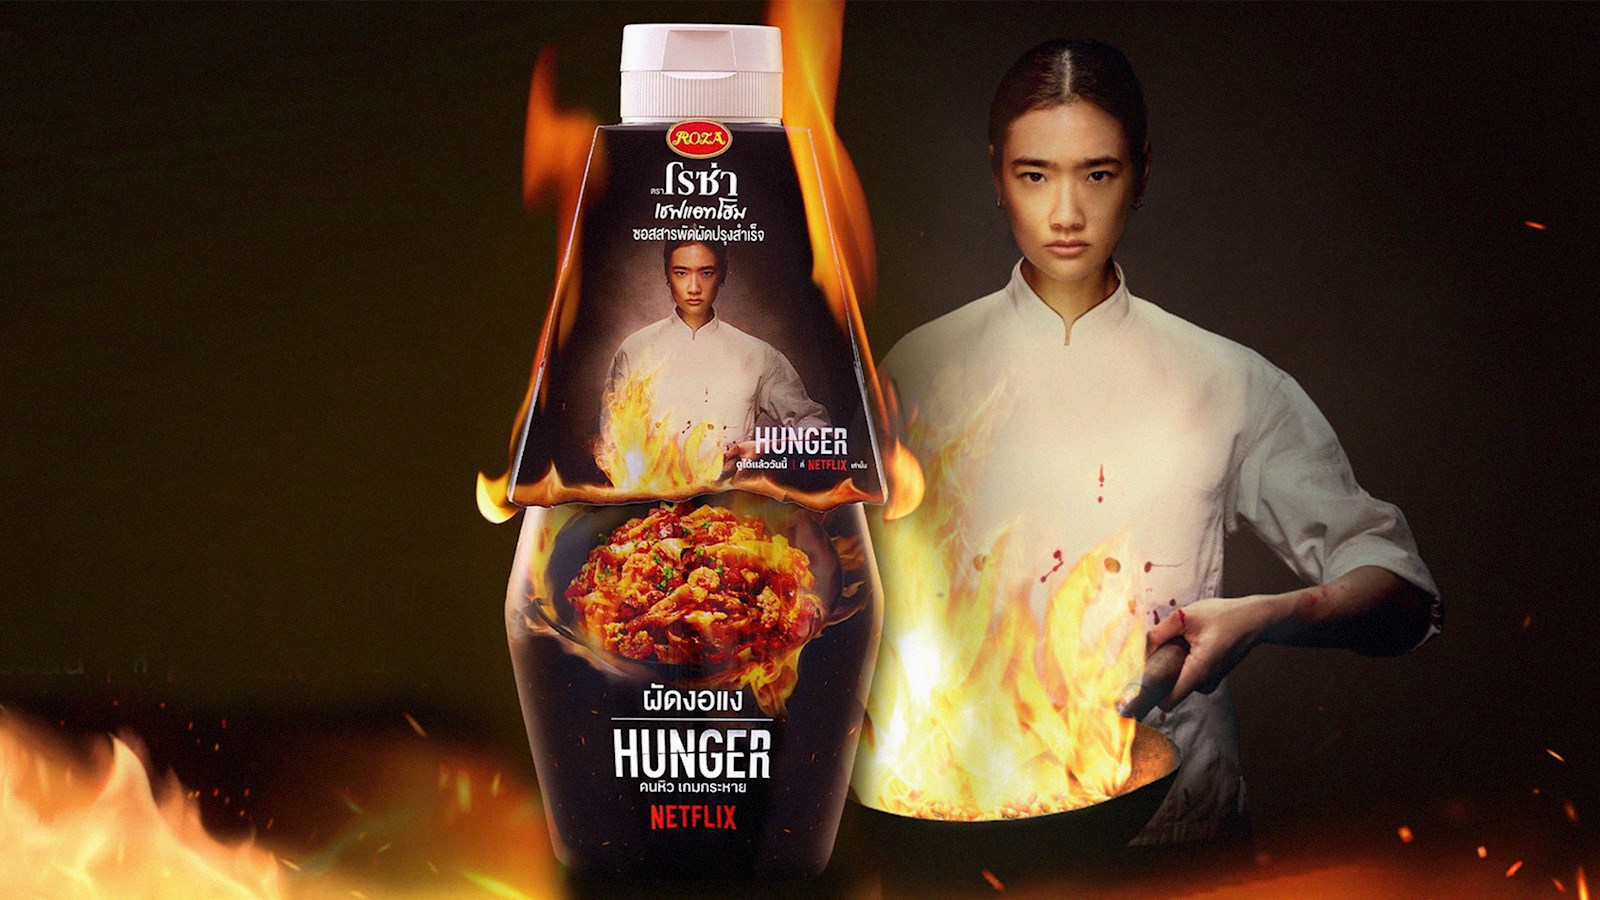 Bottle of sauce with neflix logo and chef